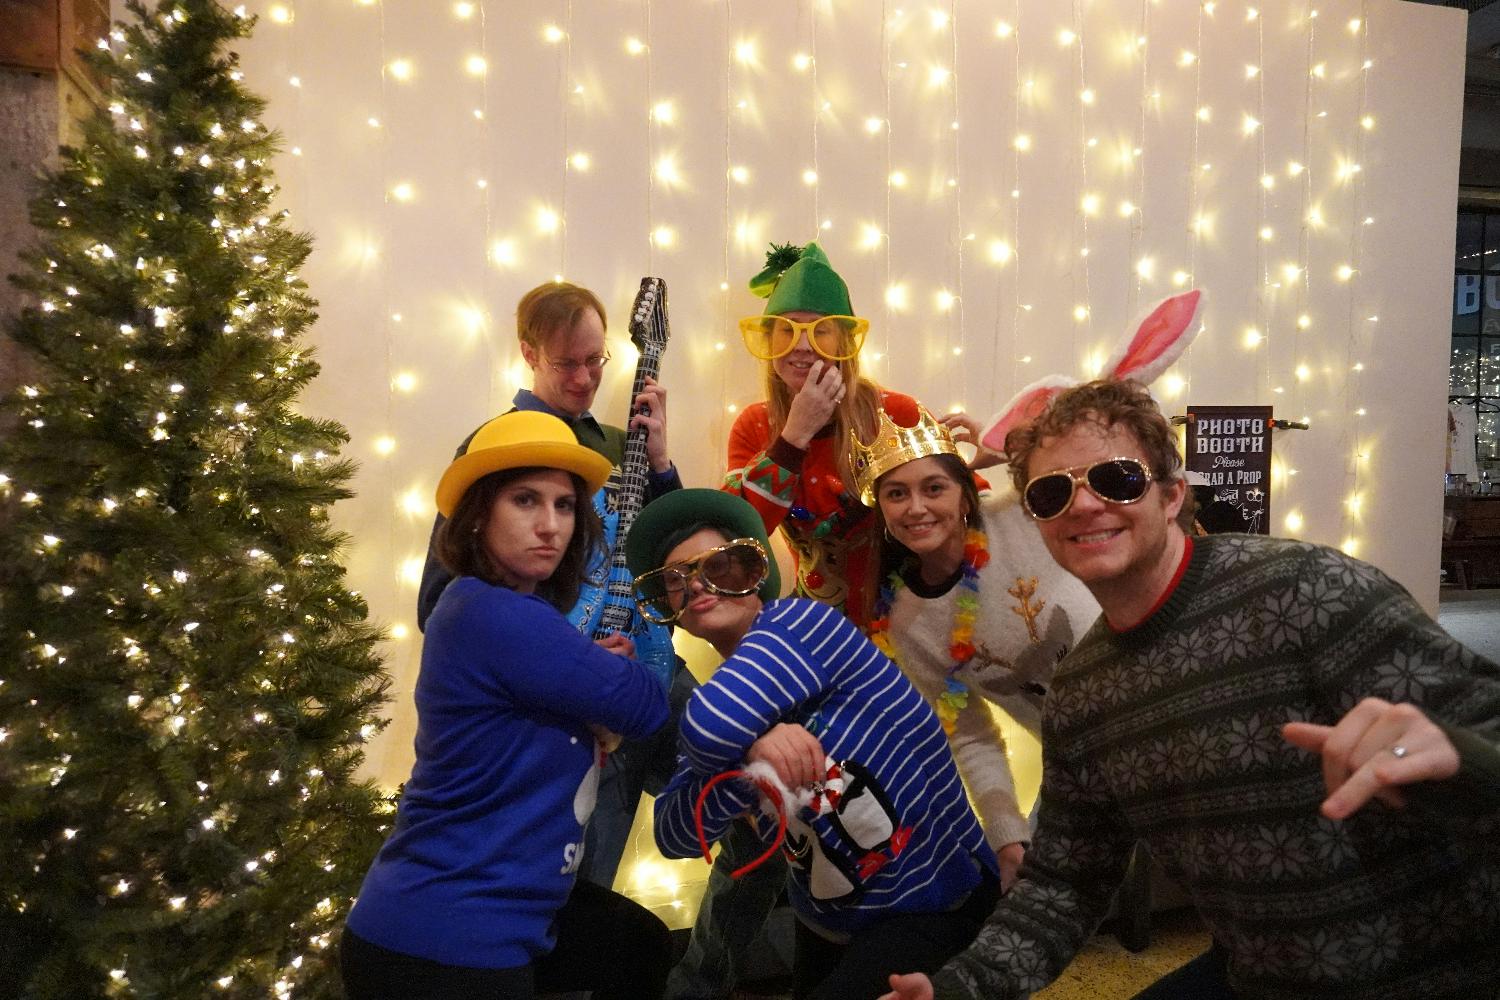 Our Regional Account Managers celebrating some holiday cheer at our annual party